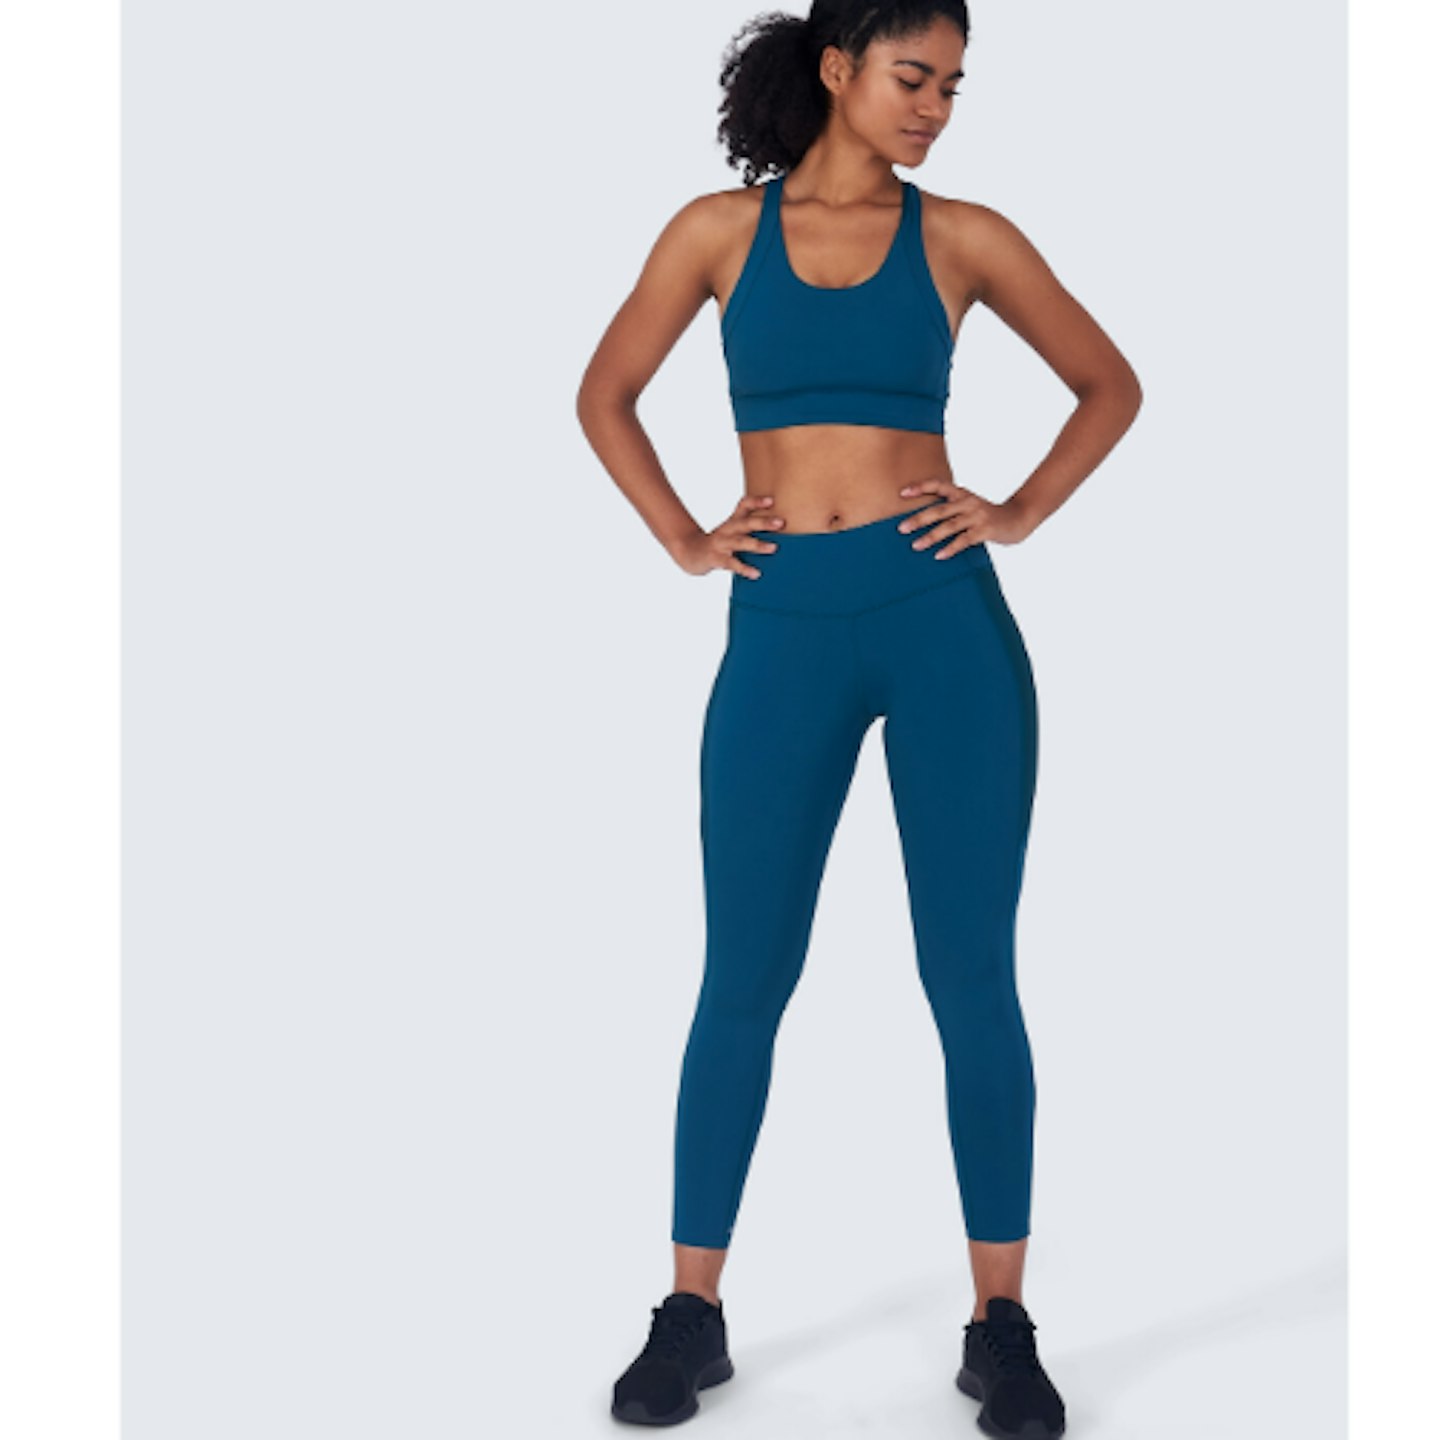 Cute Women's Gym Clothes To Feel Good In